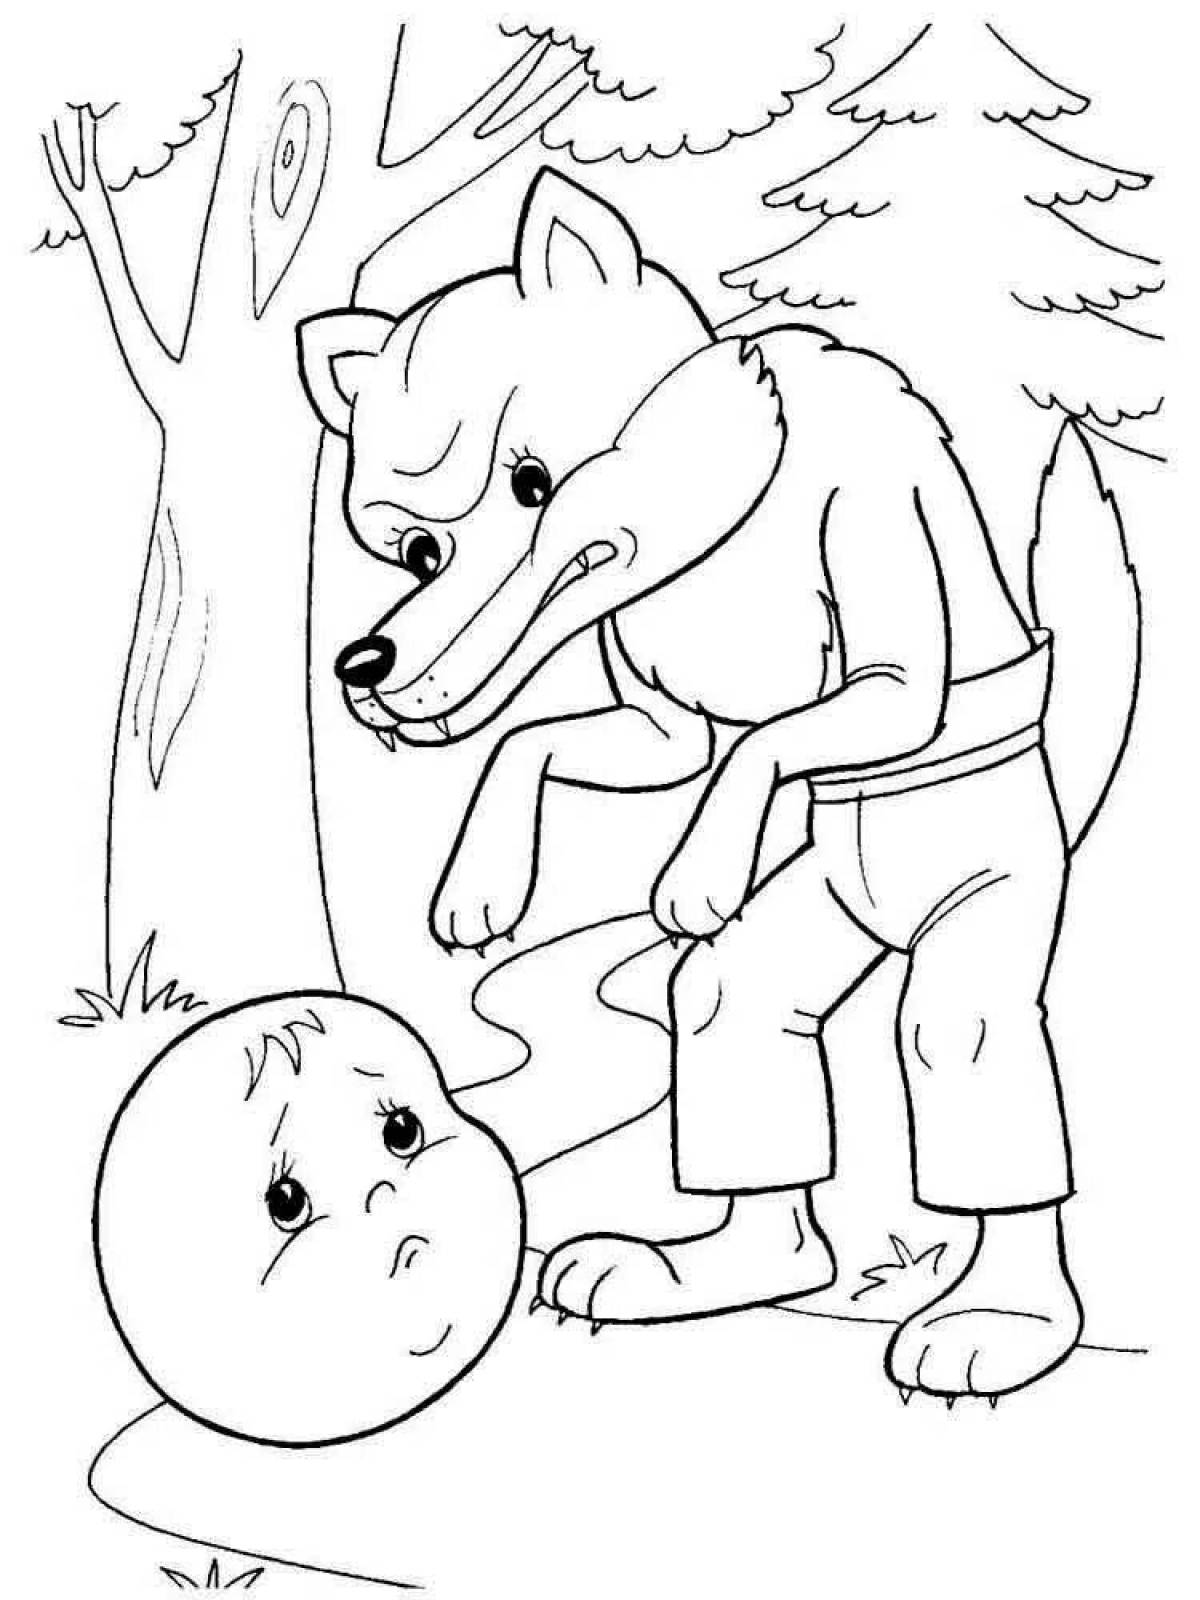 Awesome coloring pages for children's stories